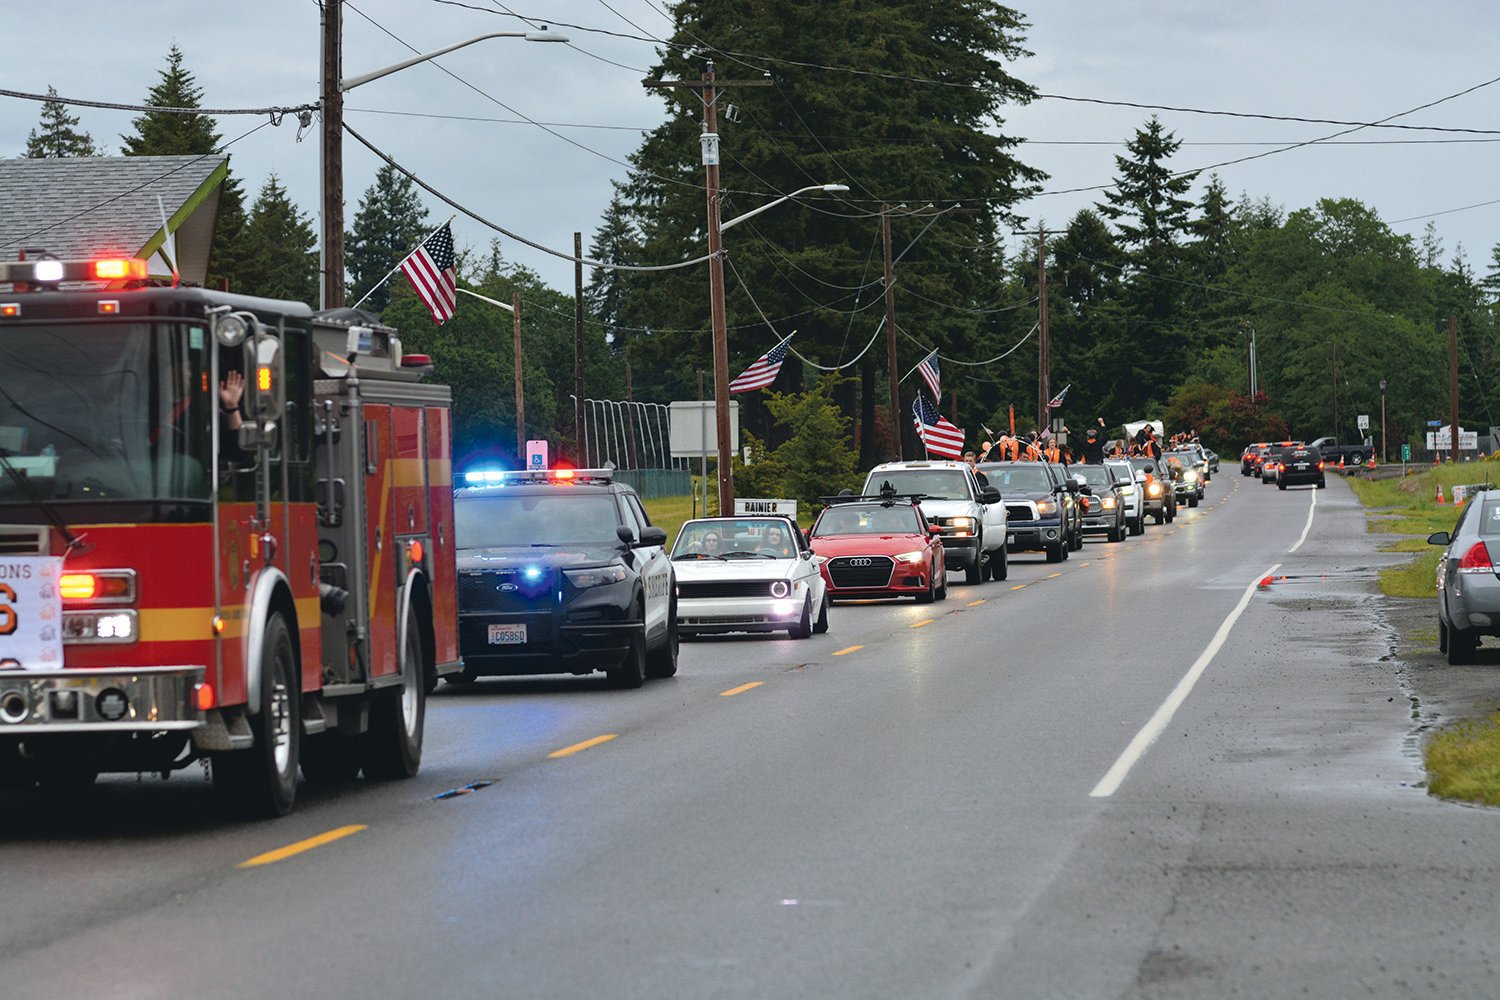 The Rainier graduation parade was led by a firetruck and a police car on Friday, June 10. The parade took place after the commencement ceremony at Rainier High School.